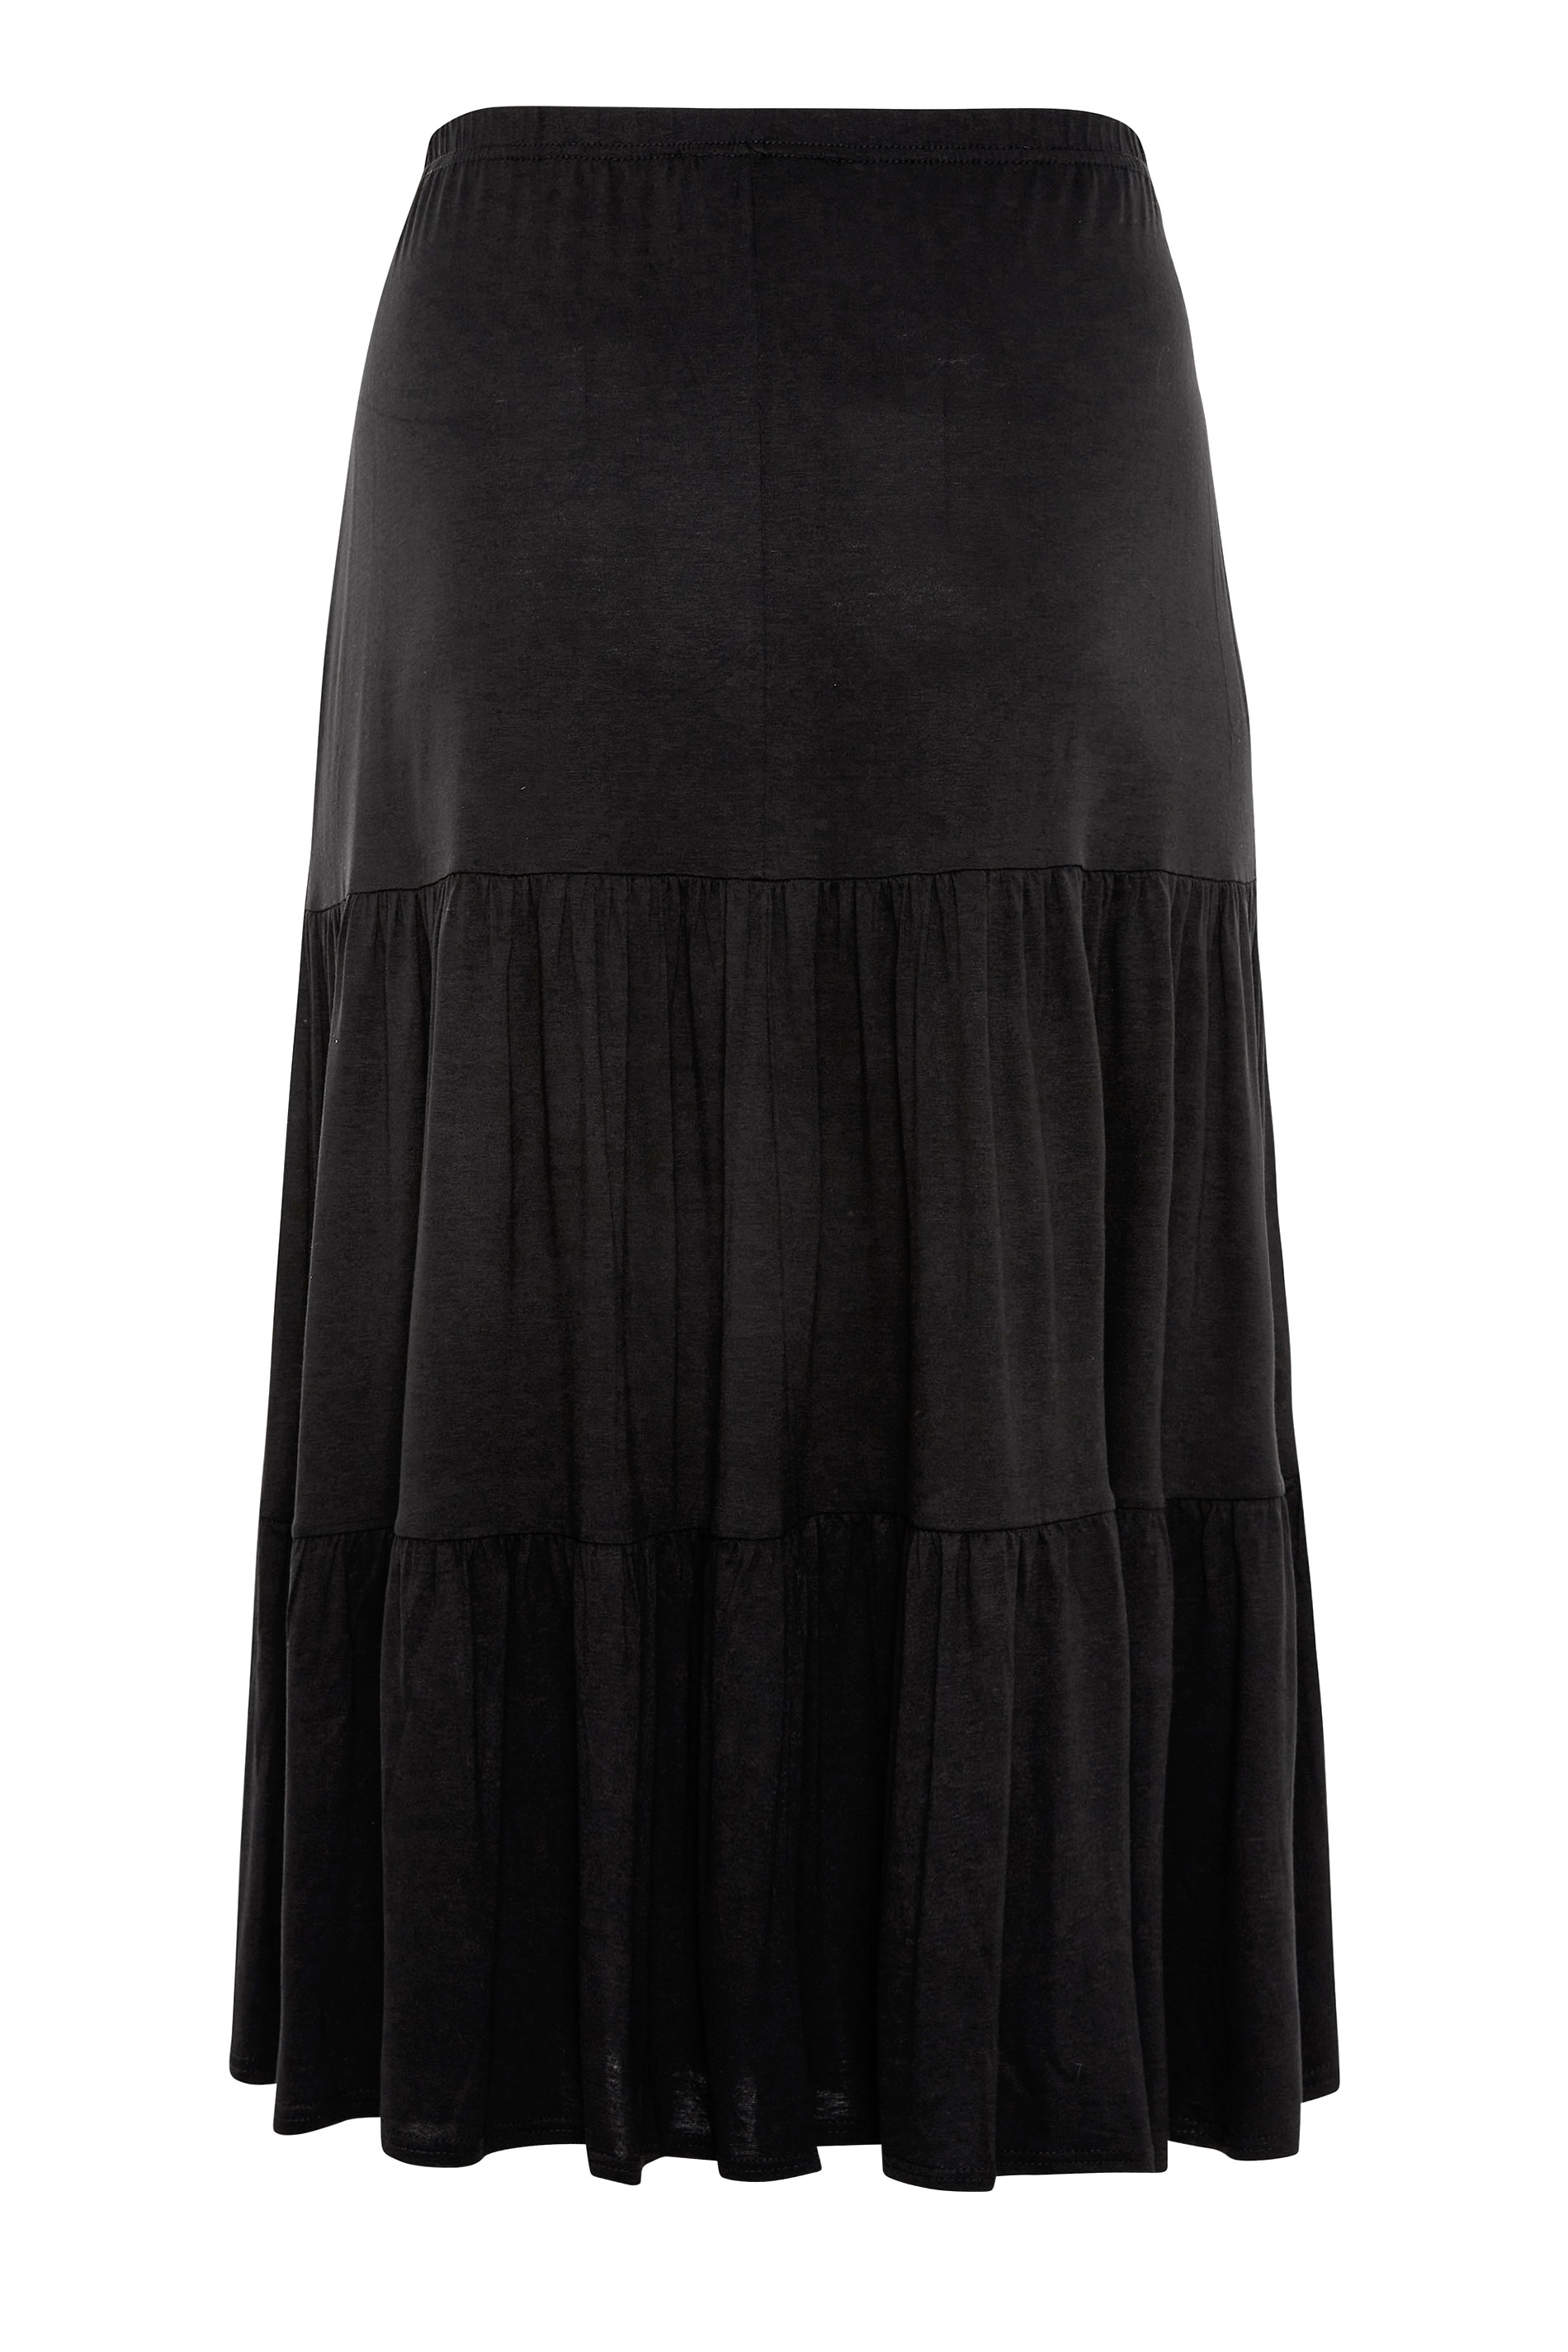 Plus Size Black Jersey Tiered Maxi Skirt Yours Clothing 5835